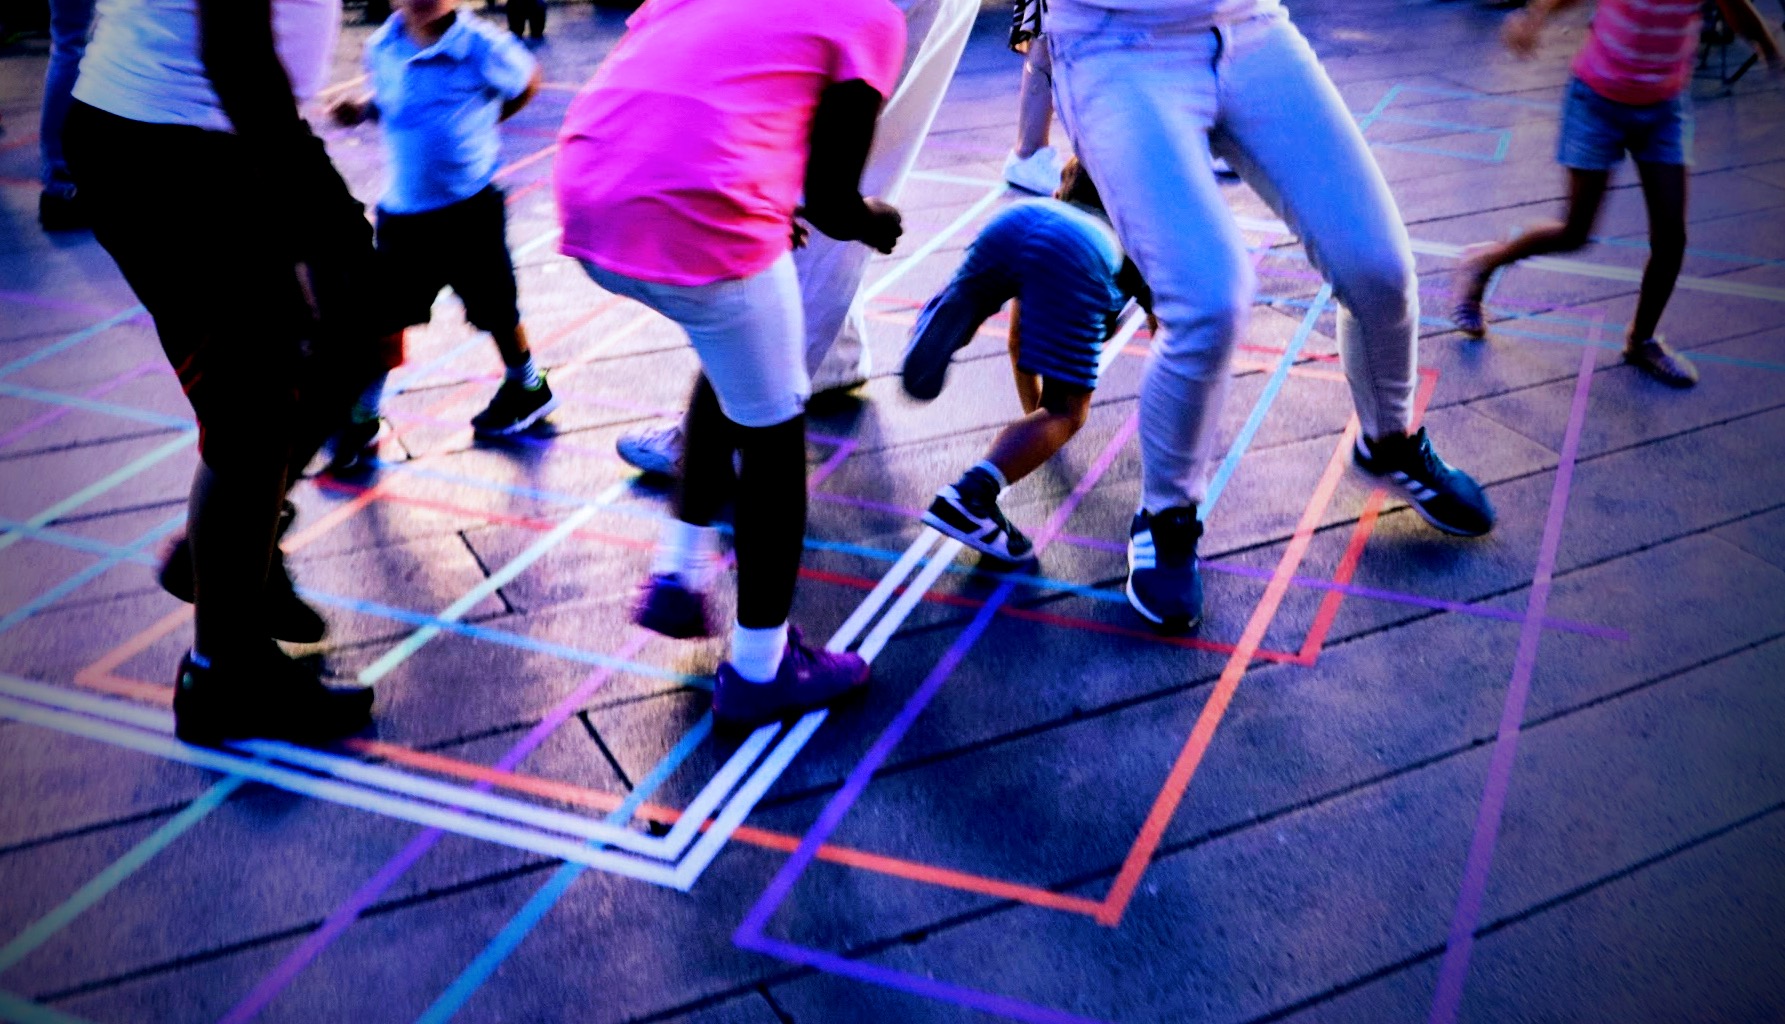 Adults and children dancing through taped lines on the ground